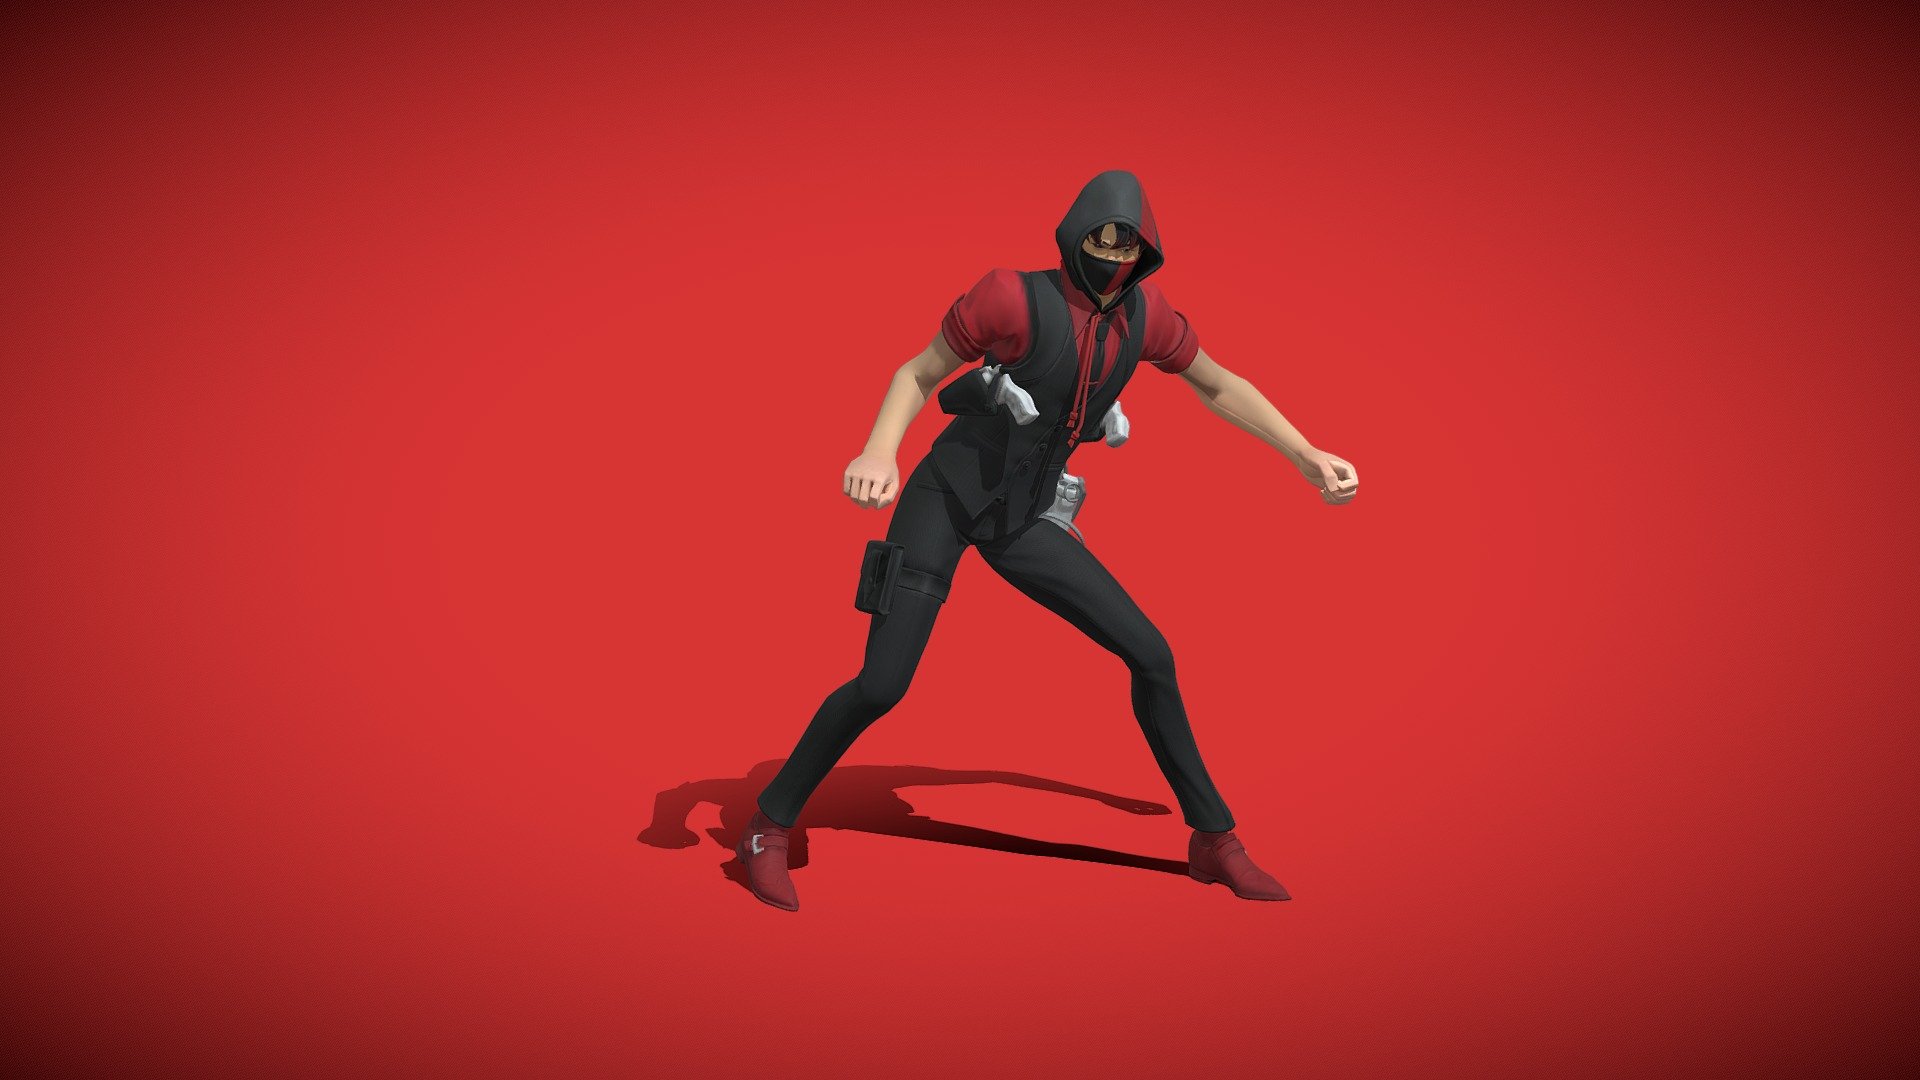 Fortnite Ikonik Agent With Smooth Moves Emote



Fortnite Rarity : Custom                                     

Difficulty To Make The Model : Easy                                                                                                                                                                                                                                                                                                                                                                                                                                   


Need a Tutorial To Make A Model?                                                                                                                                                                                                                                   Subscibe To My Yt Channel : https://www.youtube.com/channel/UCP8jaALy9hFm5oMAyKQEgLA?view_as=subscriber

Join My Discord Server Too : https://discord.gg/r8t6JJJ - Fortnite Ikonik Agent With Smooth Moves Emote - Download Free 3D model by AstroNatee 3d model